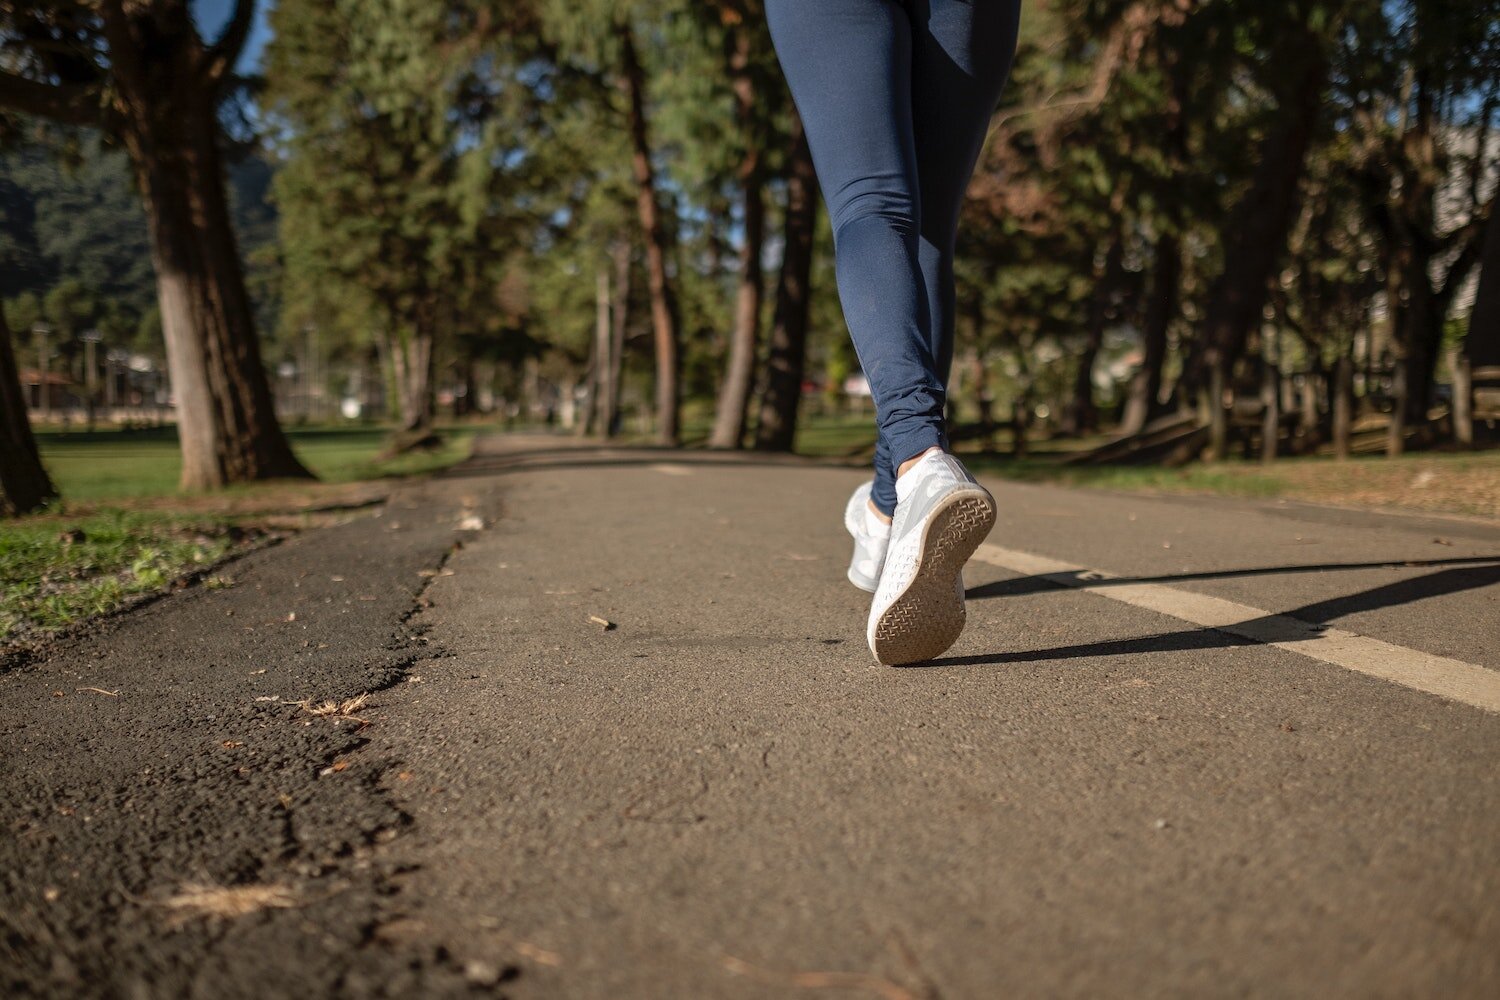 Take a walk or jog to get exercise, and pick up litter in your neighborhood along the way.